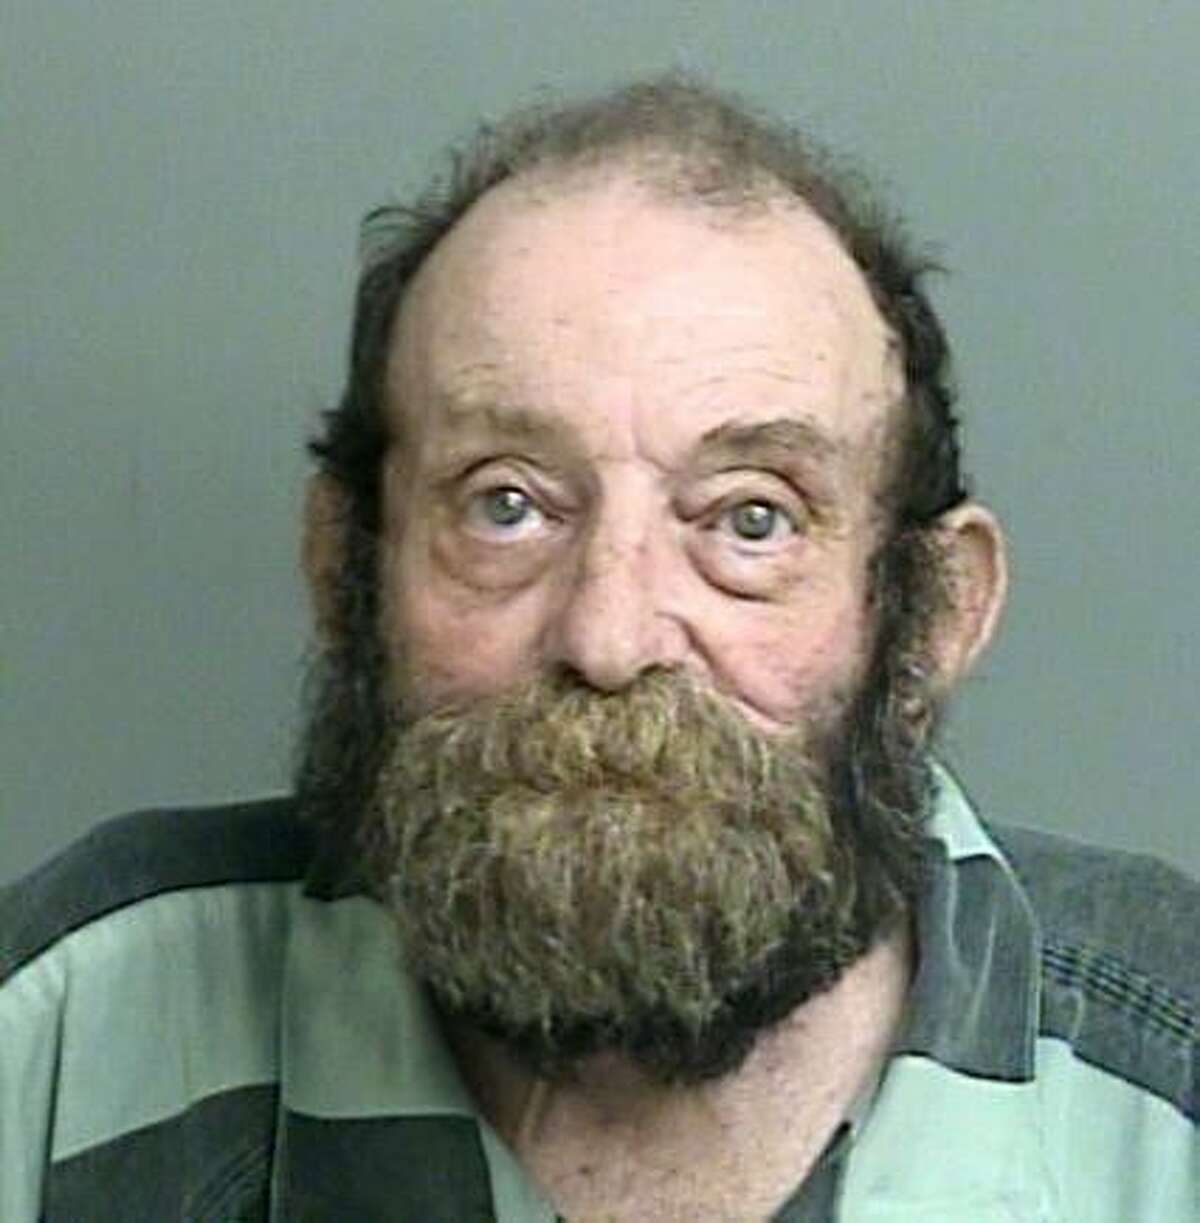 NORRIS, William Phillip Sr.White/Male DOB: 06-24-1942 Height 5’06” Weight: 148 lbs. Hair: Black Eyes: Blue Warrant: #140707942 Bond Forfeiture Accident Involving SBI or Death LKA: FM 1485, New Caney.